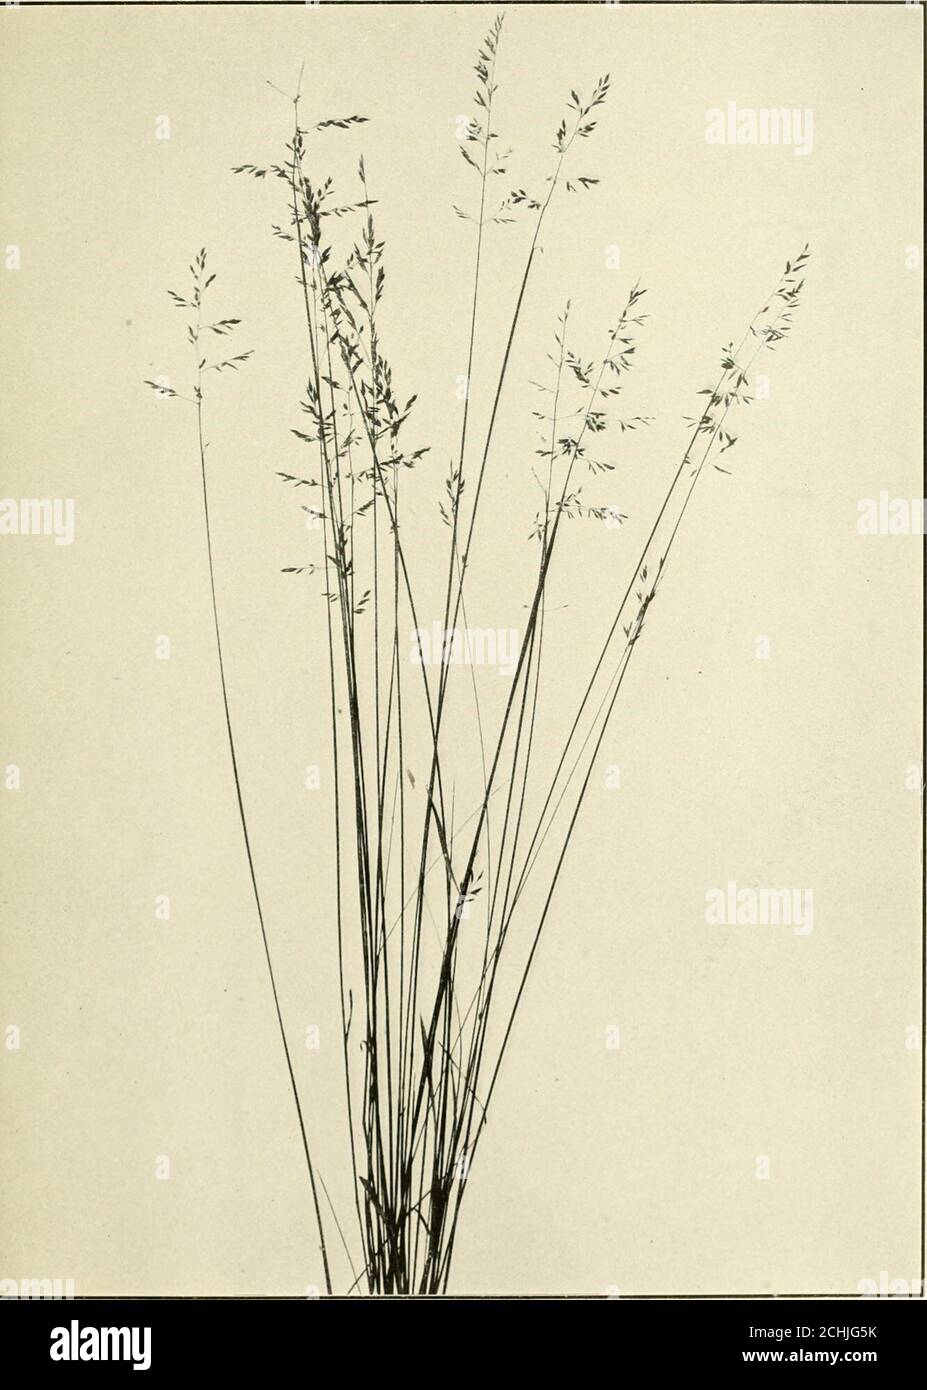 . The book of grasses : an illustrated guide to the common grasses, and the most common of the rushes and sedges . False Red-top, or FowlMeadow-grass. Poa triflora. CAXAnA BLUE-GRASS {Poa compressa). One half natural size vS^ - V A *• t,, • .» .  ■■ -i !r V -&gt; V ^.-^ -&lt;. V ,J &lt;- ^ y .^ 1 ,^ V V ^ ^ . ^ ,. N P^S,. --V N ^ -v^ ^ ^ ■&gt; ■* -=^- -&gt;^S i/W/n./Zoral. Three ((uaru-rs natural size Stock Photo